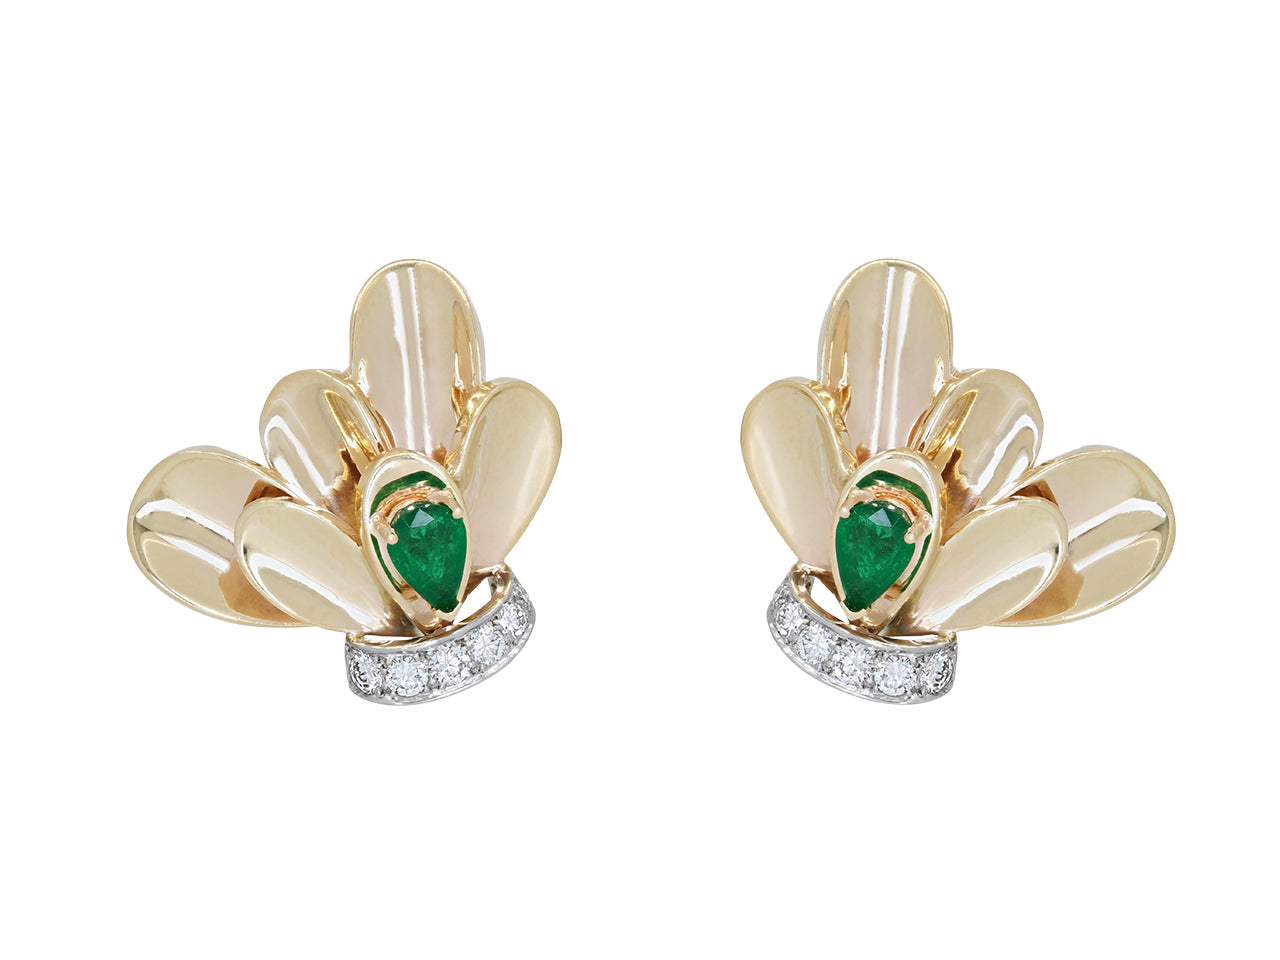 Limoges Emerald and Diamond Earclips in 14K Gold